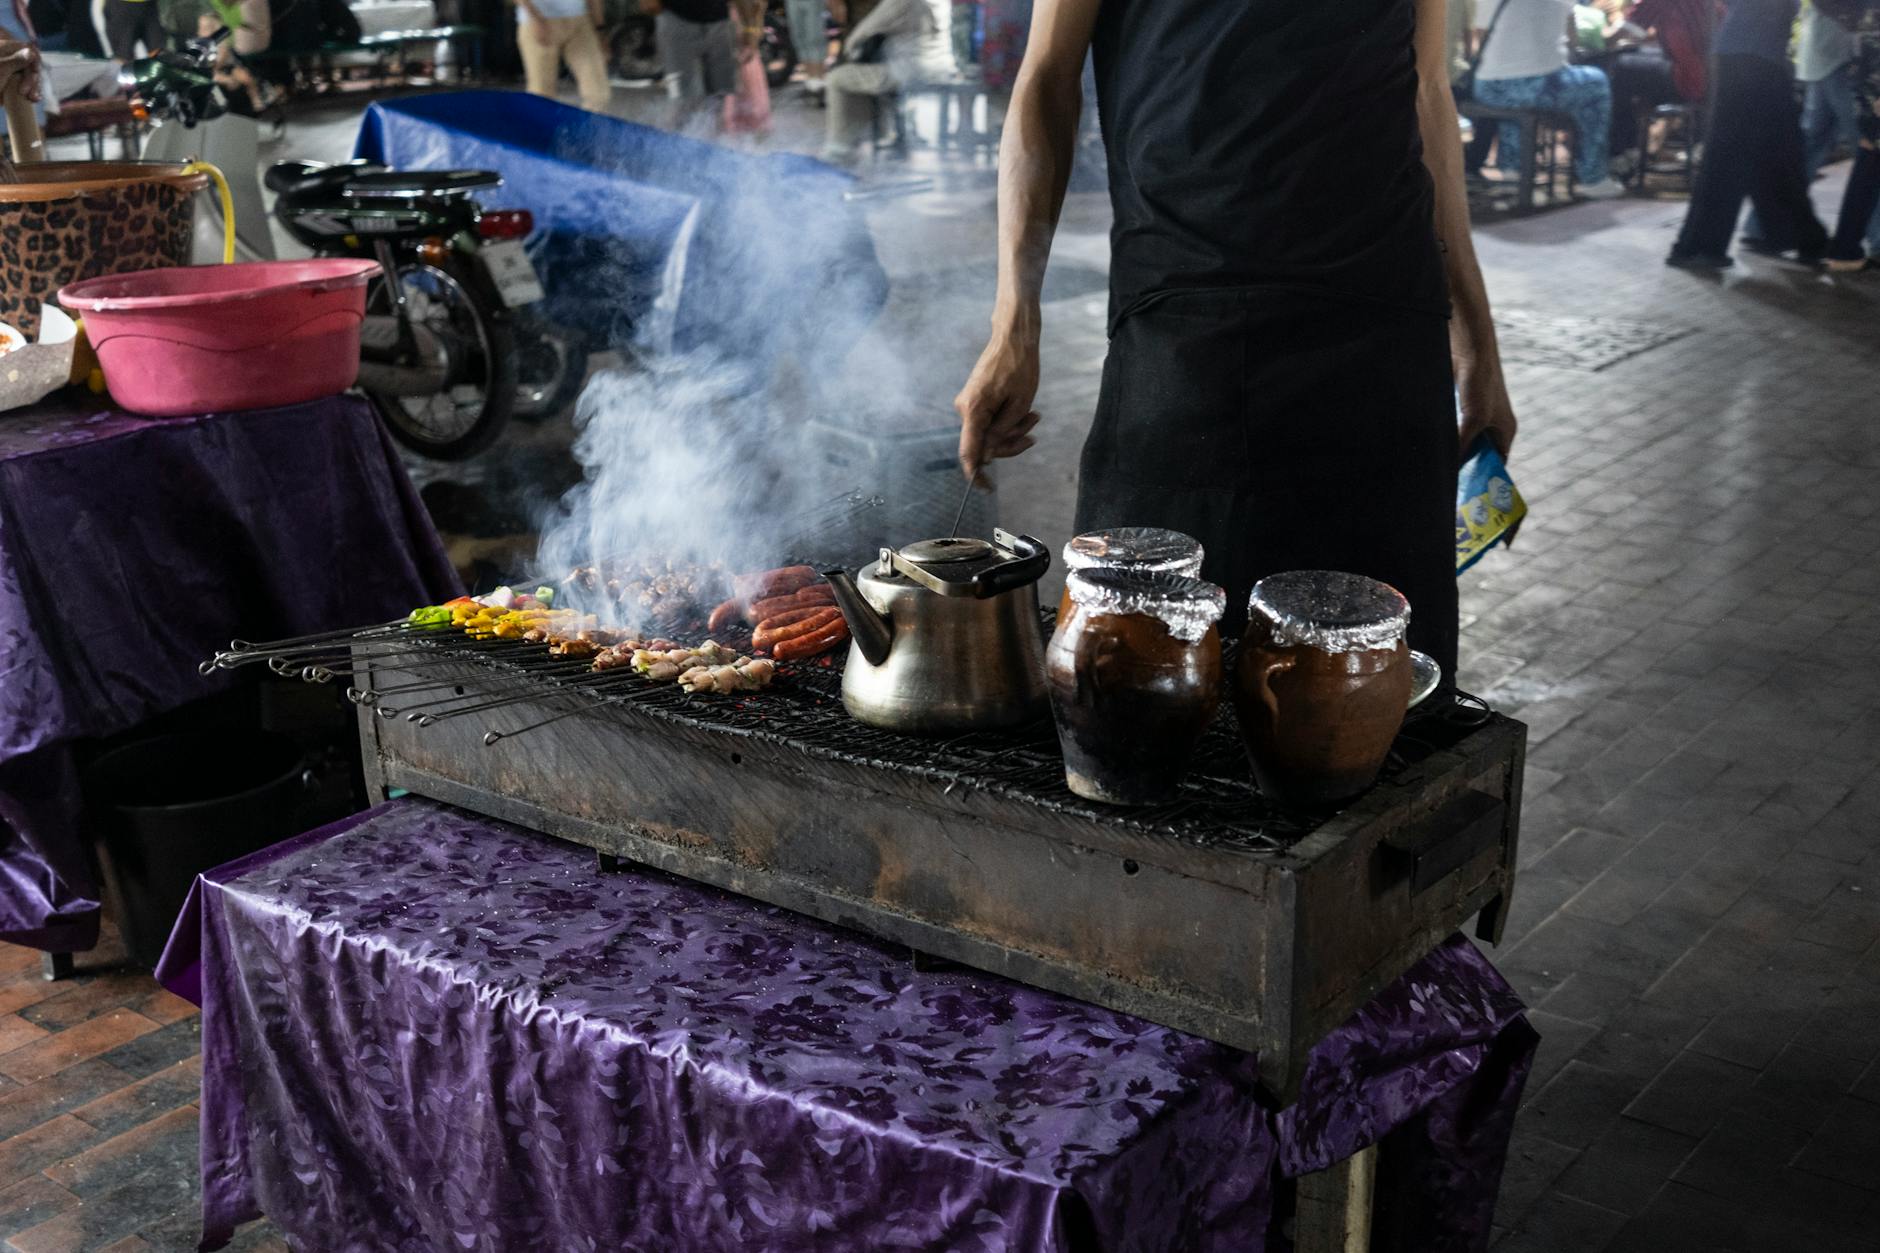 A Man Grilling Sausages On A Grill On A Street